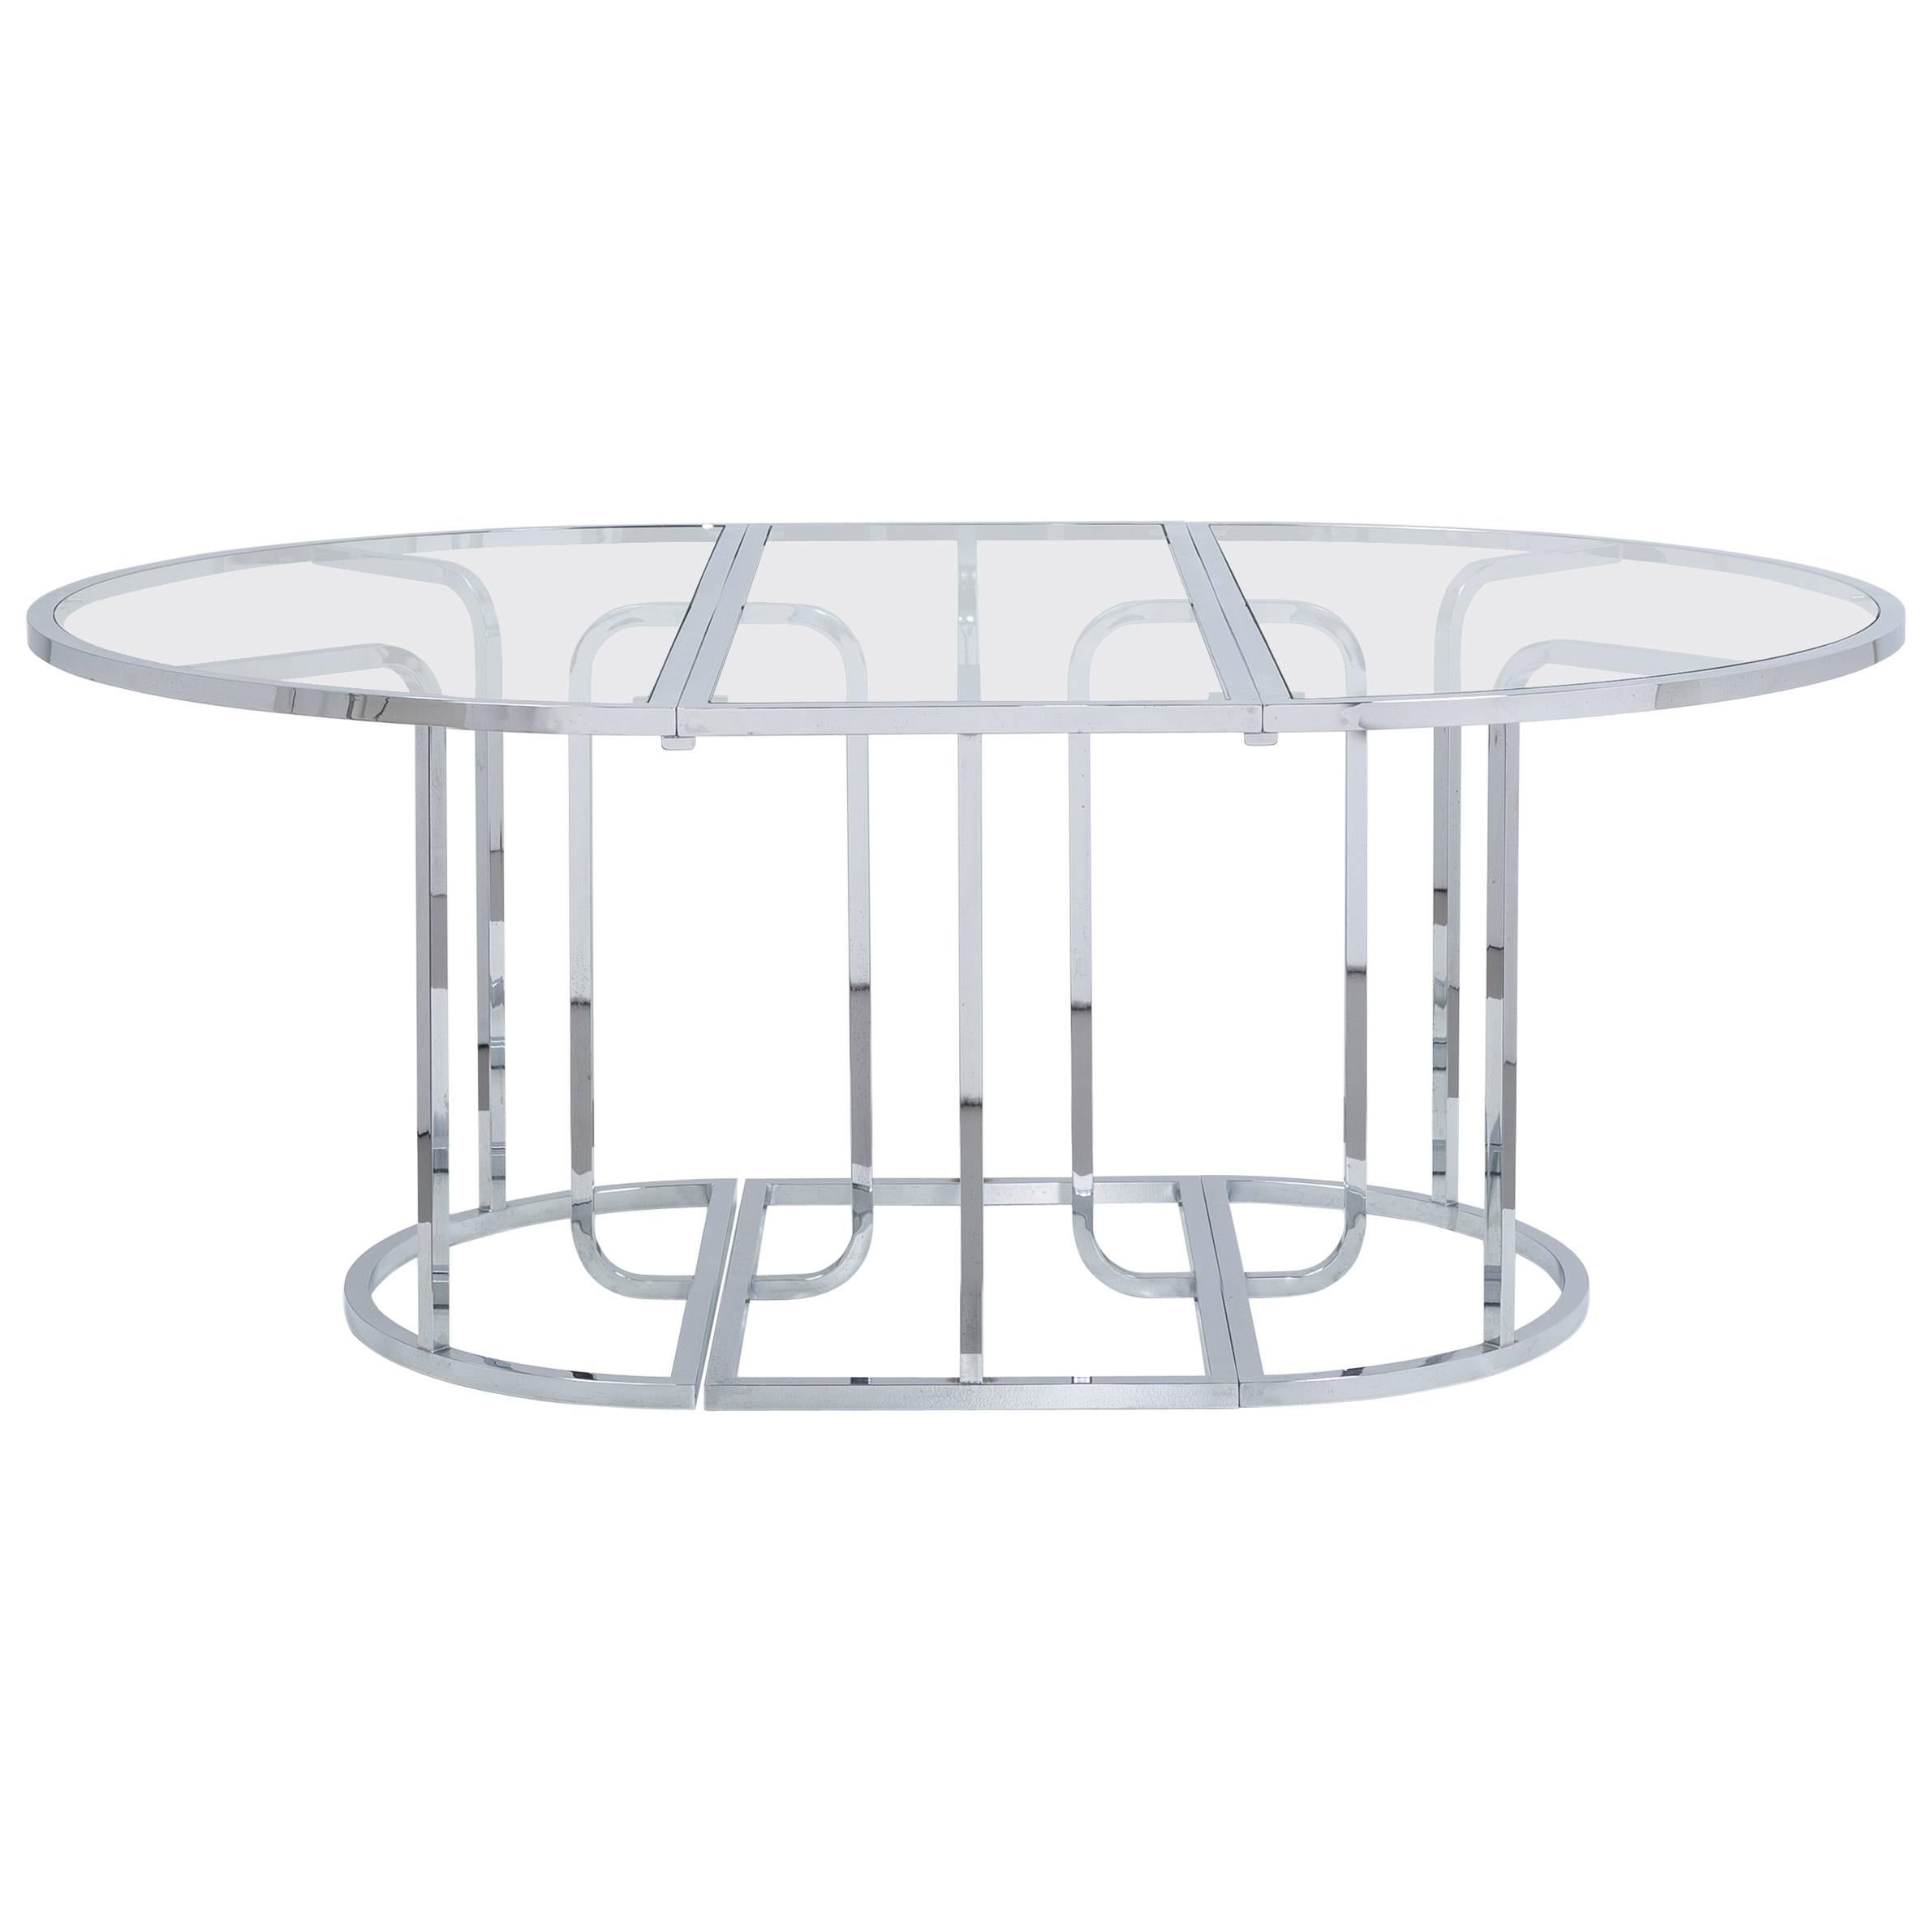 Three-Part Chromium Steel Framed Glass Dining Table, 1970s For Sale